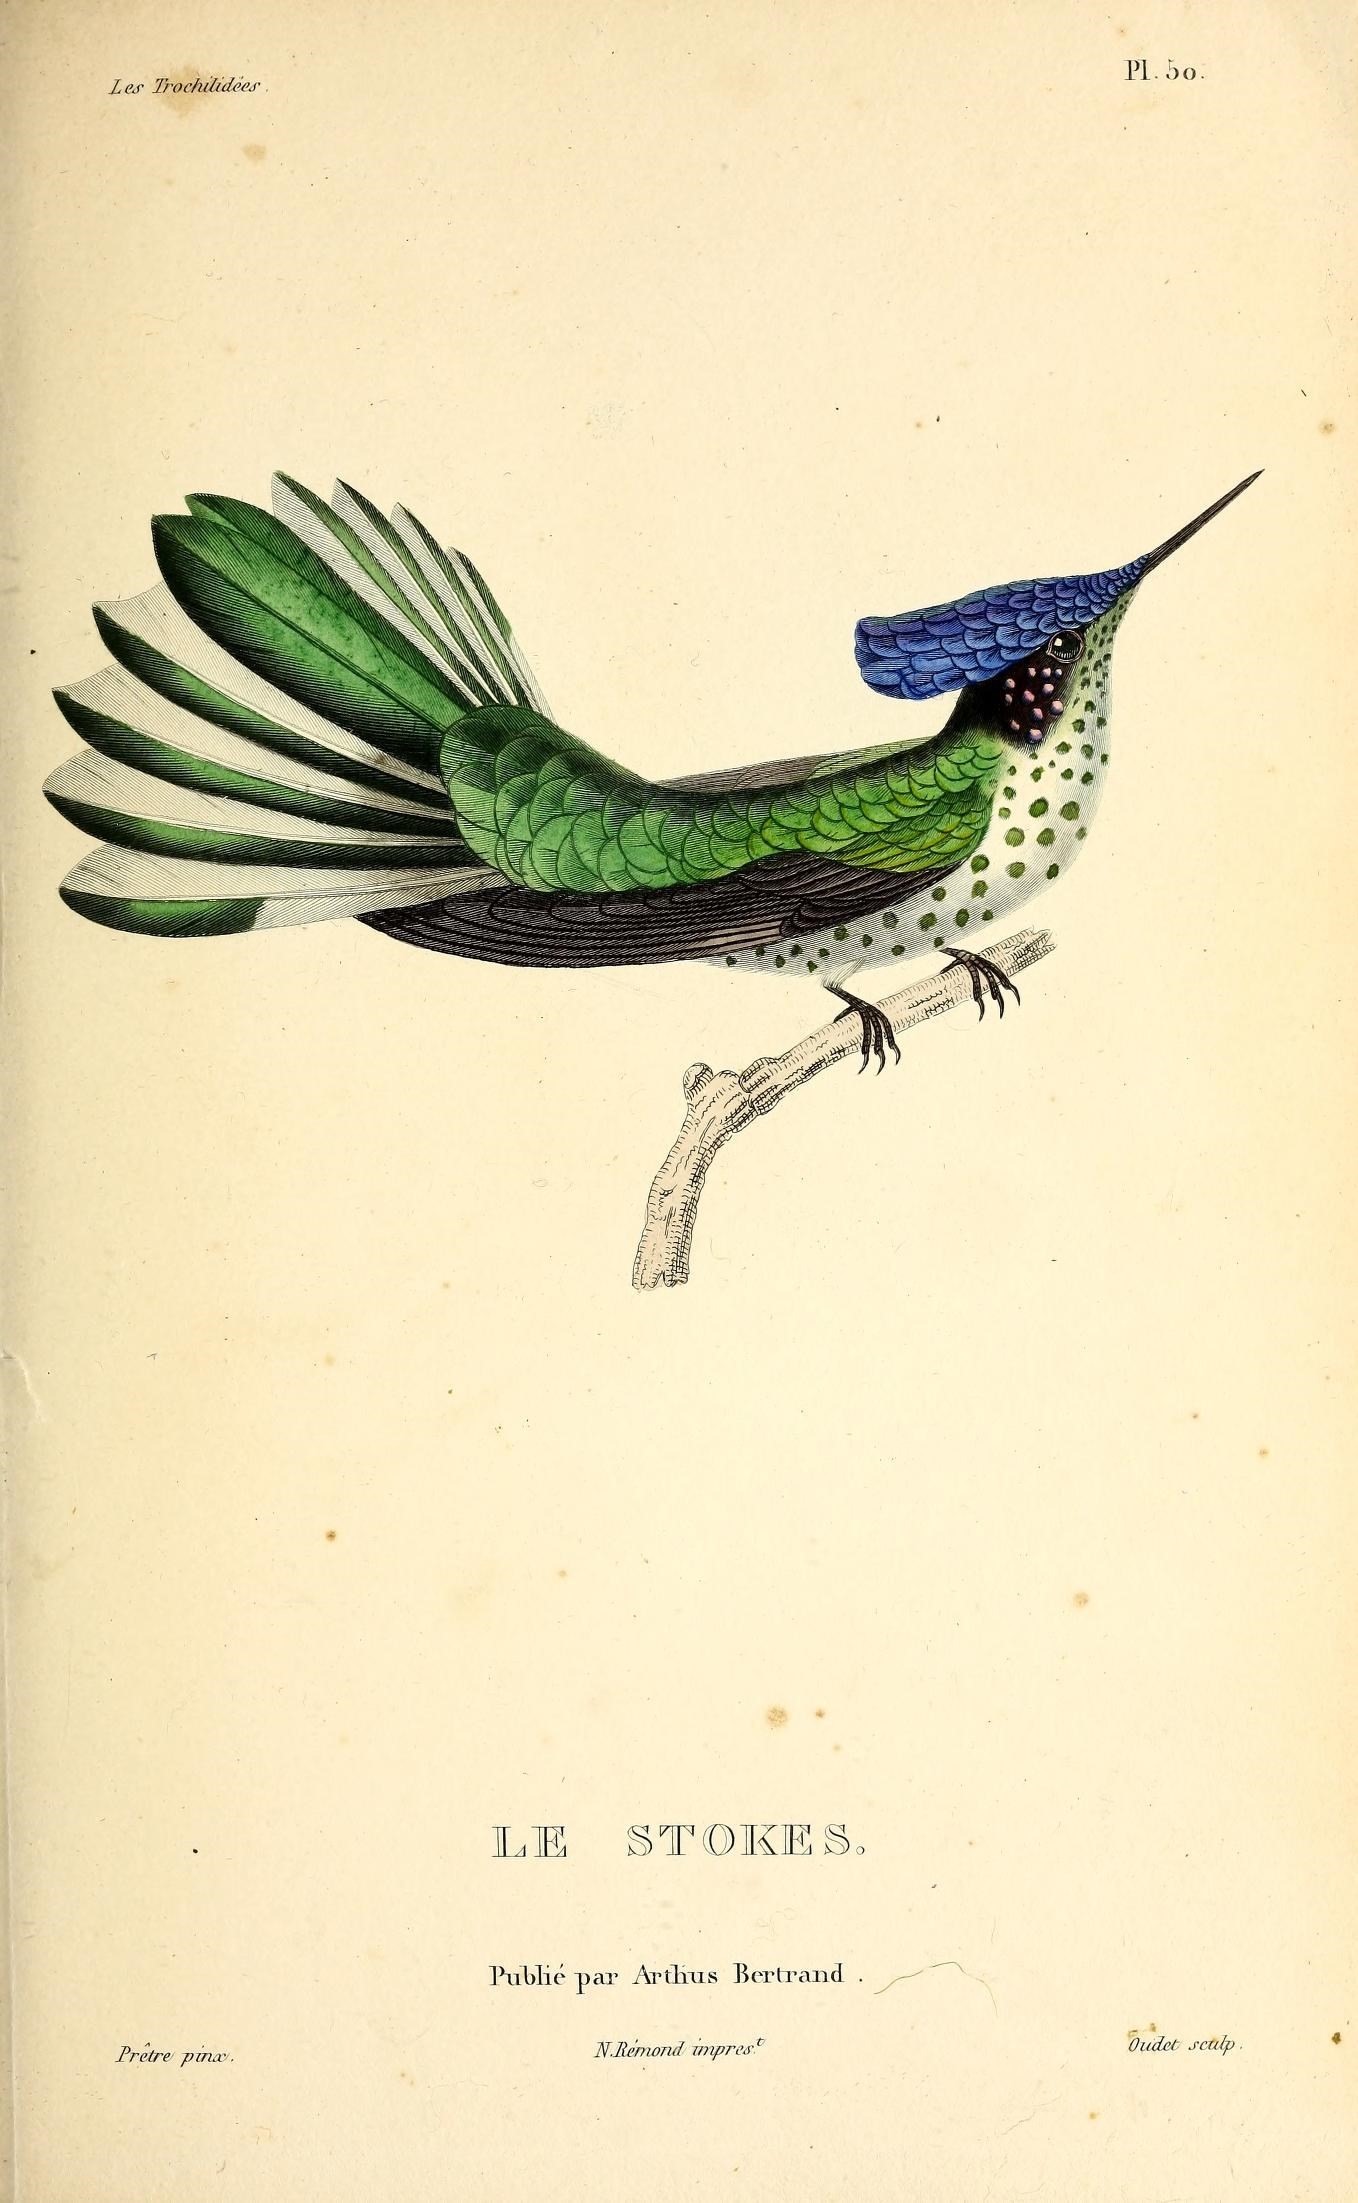 the little blue - and - green fly bird is a small, colorful bird with blue tail feathers